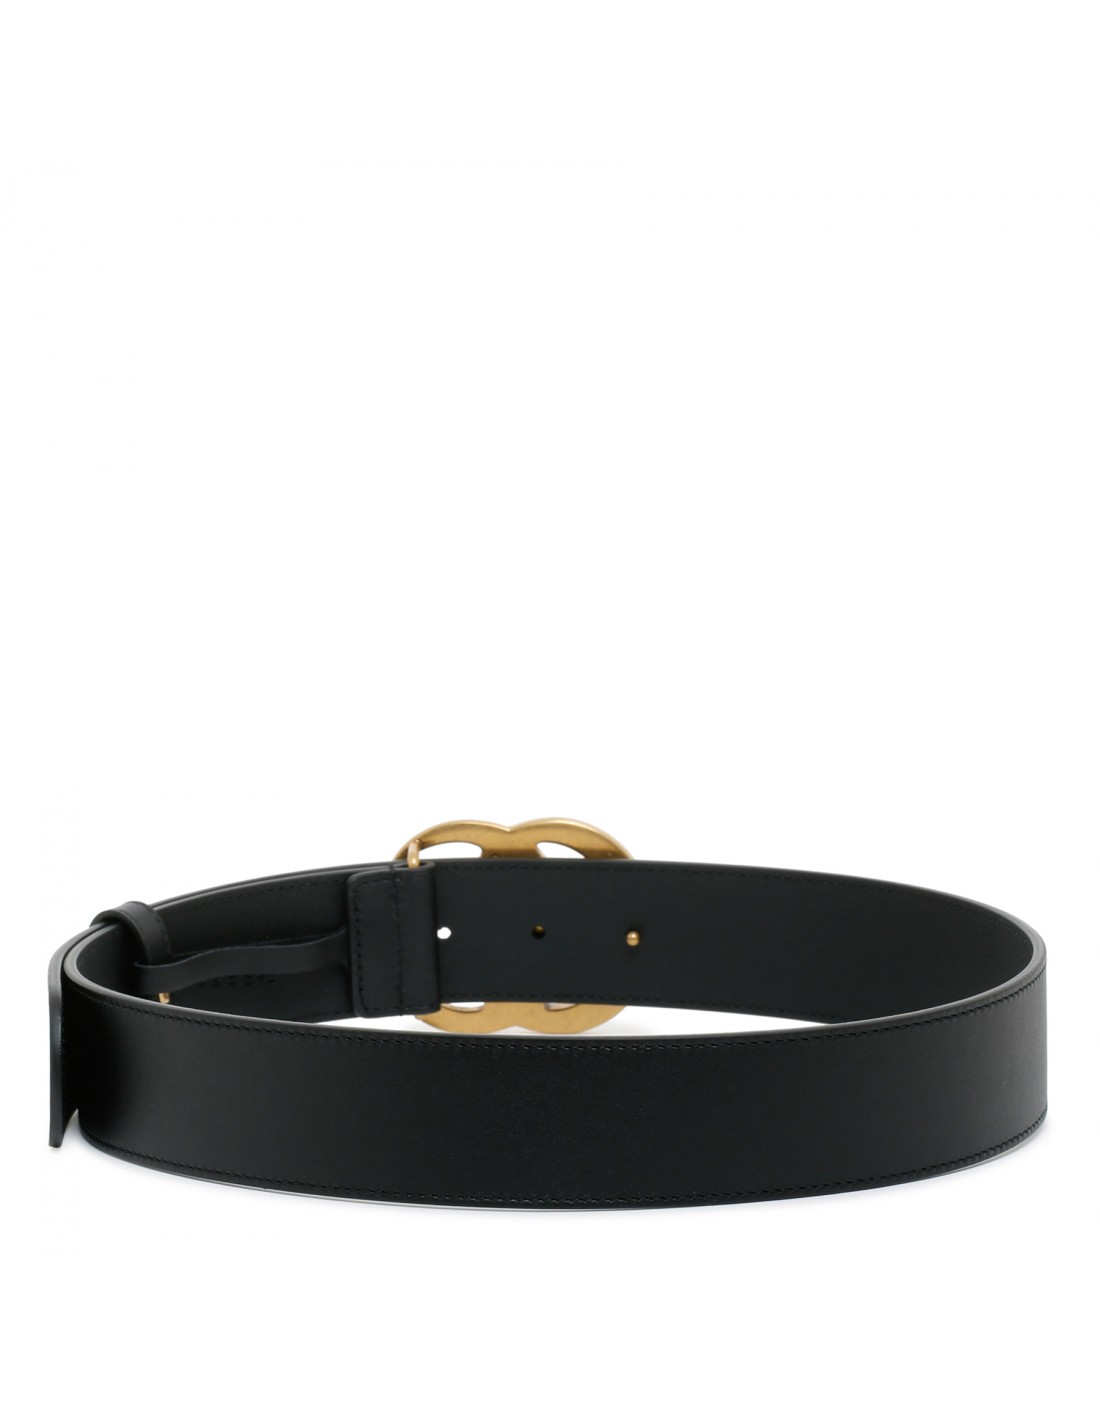 2015 Re-Edition leather belt